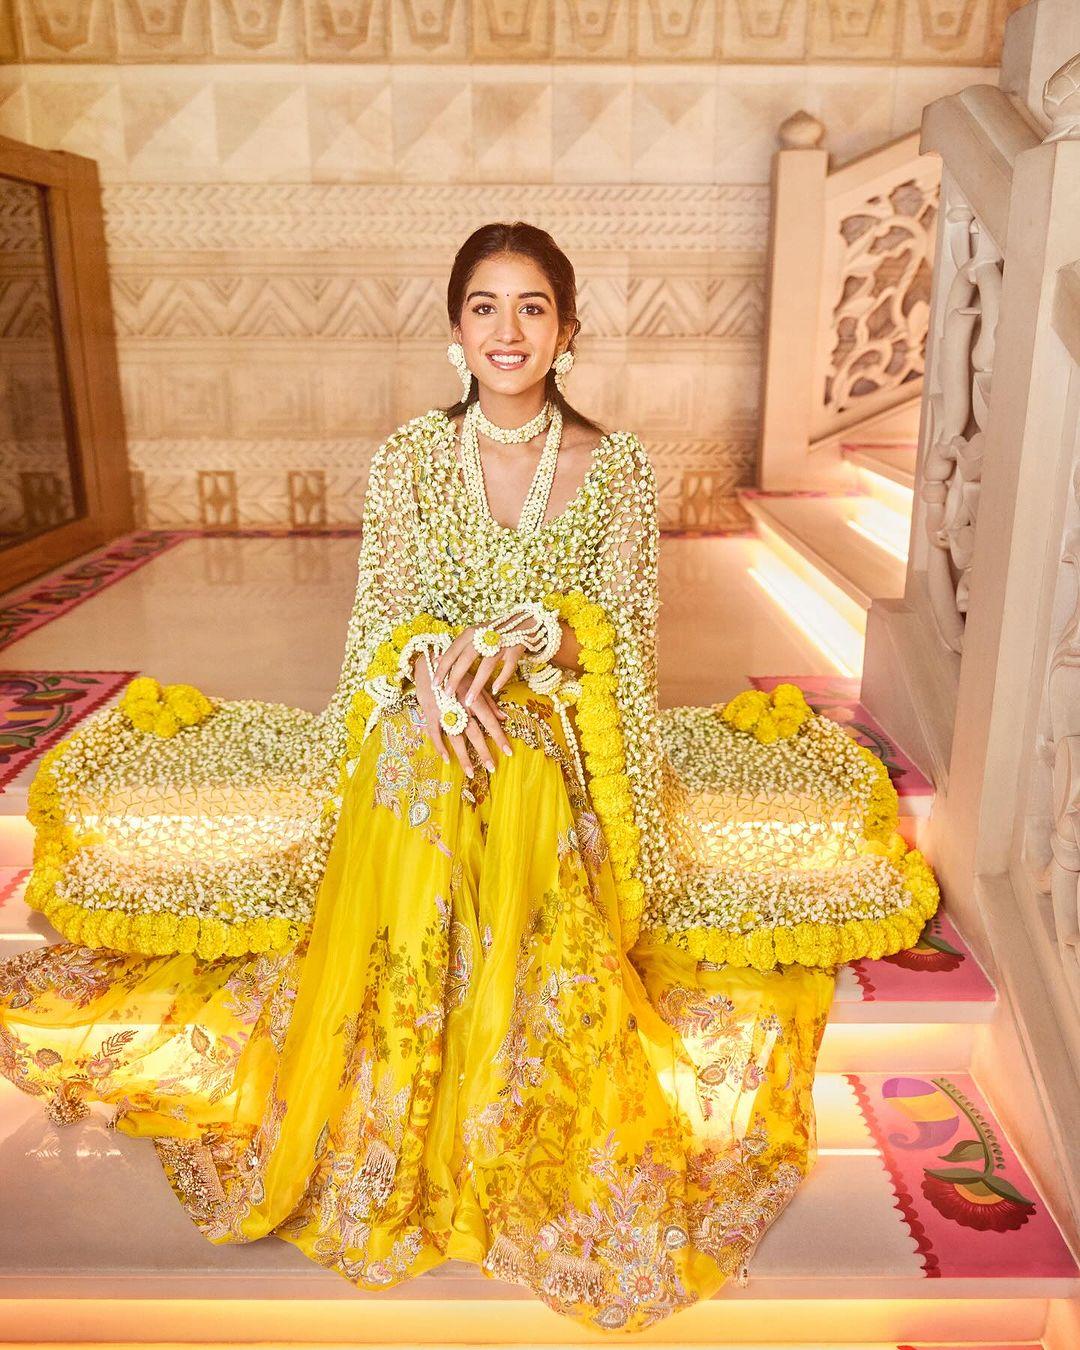 Stylist Rhea Kapoor shared pictures of her look. Radhika wore a 'phool dupatta' over what appears to be a sharara by Anamika Khanna and accessorized with jewellery made from flowers.